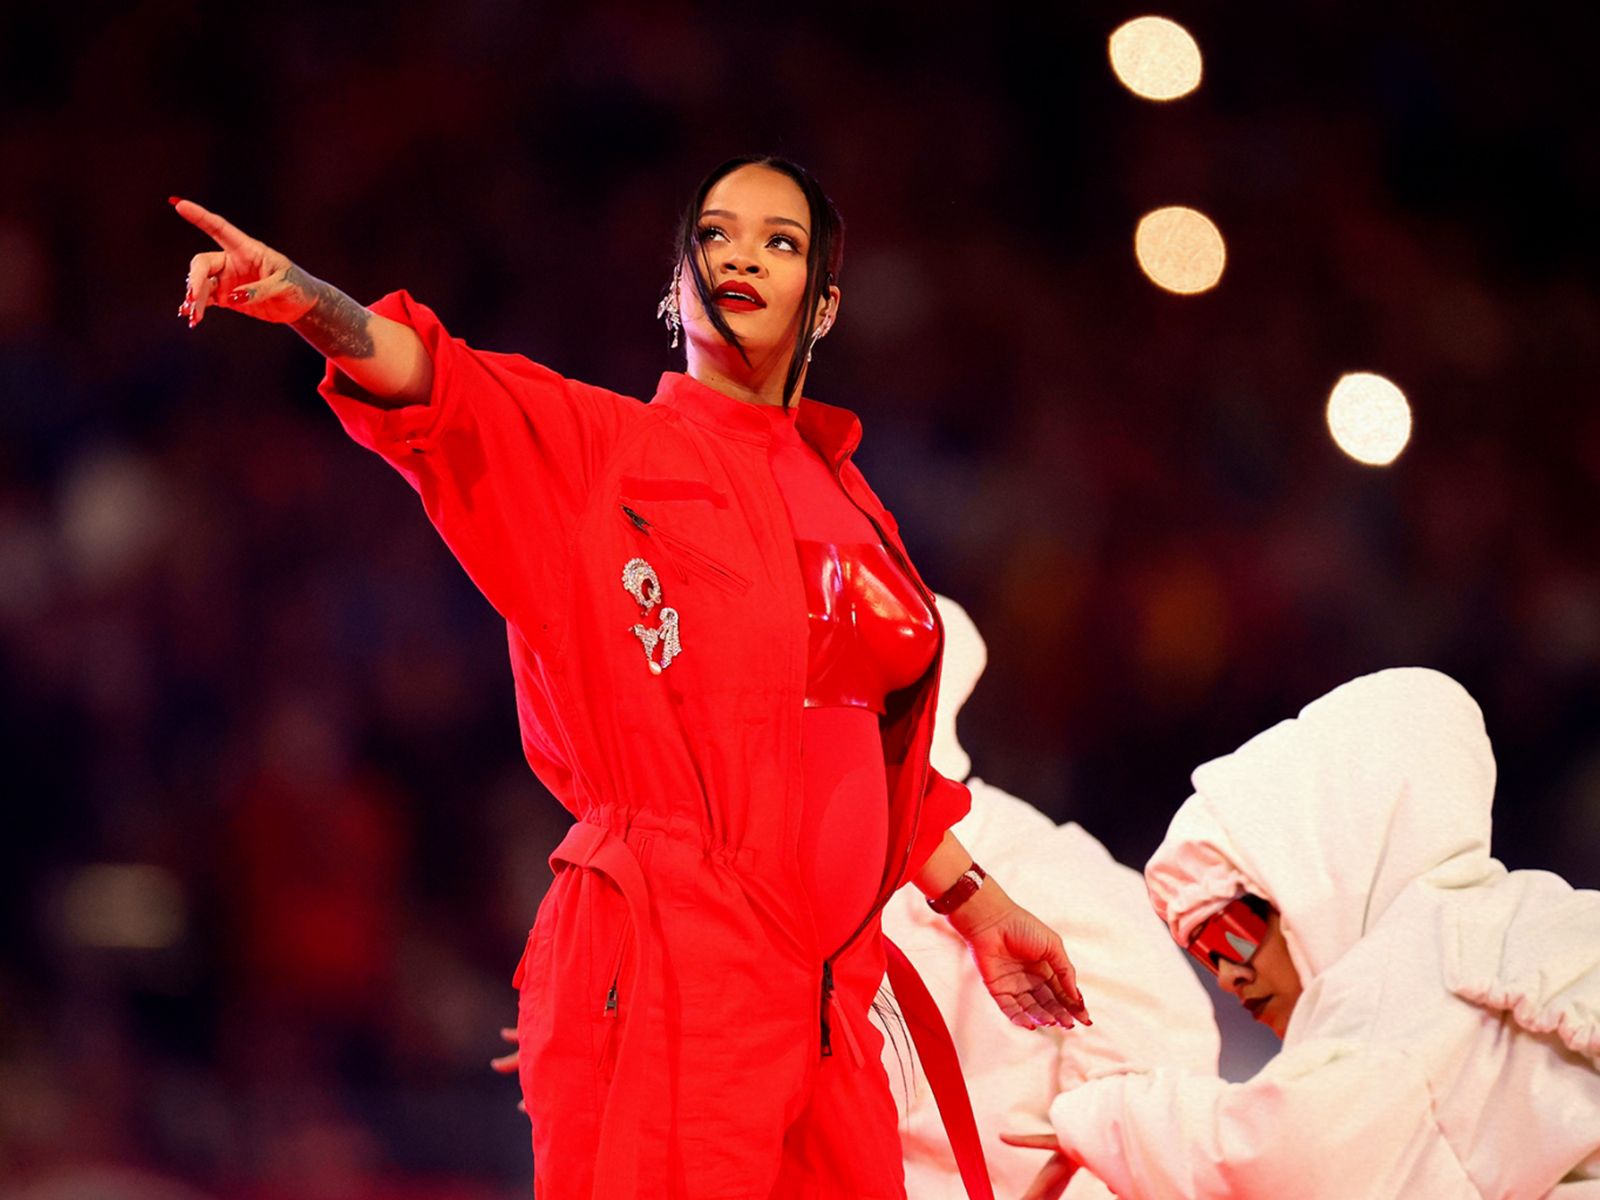 All about Rihanna’s performance at the Super Bowl